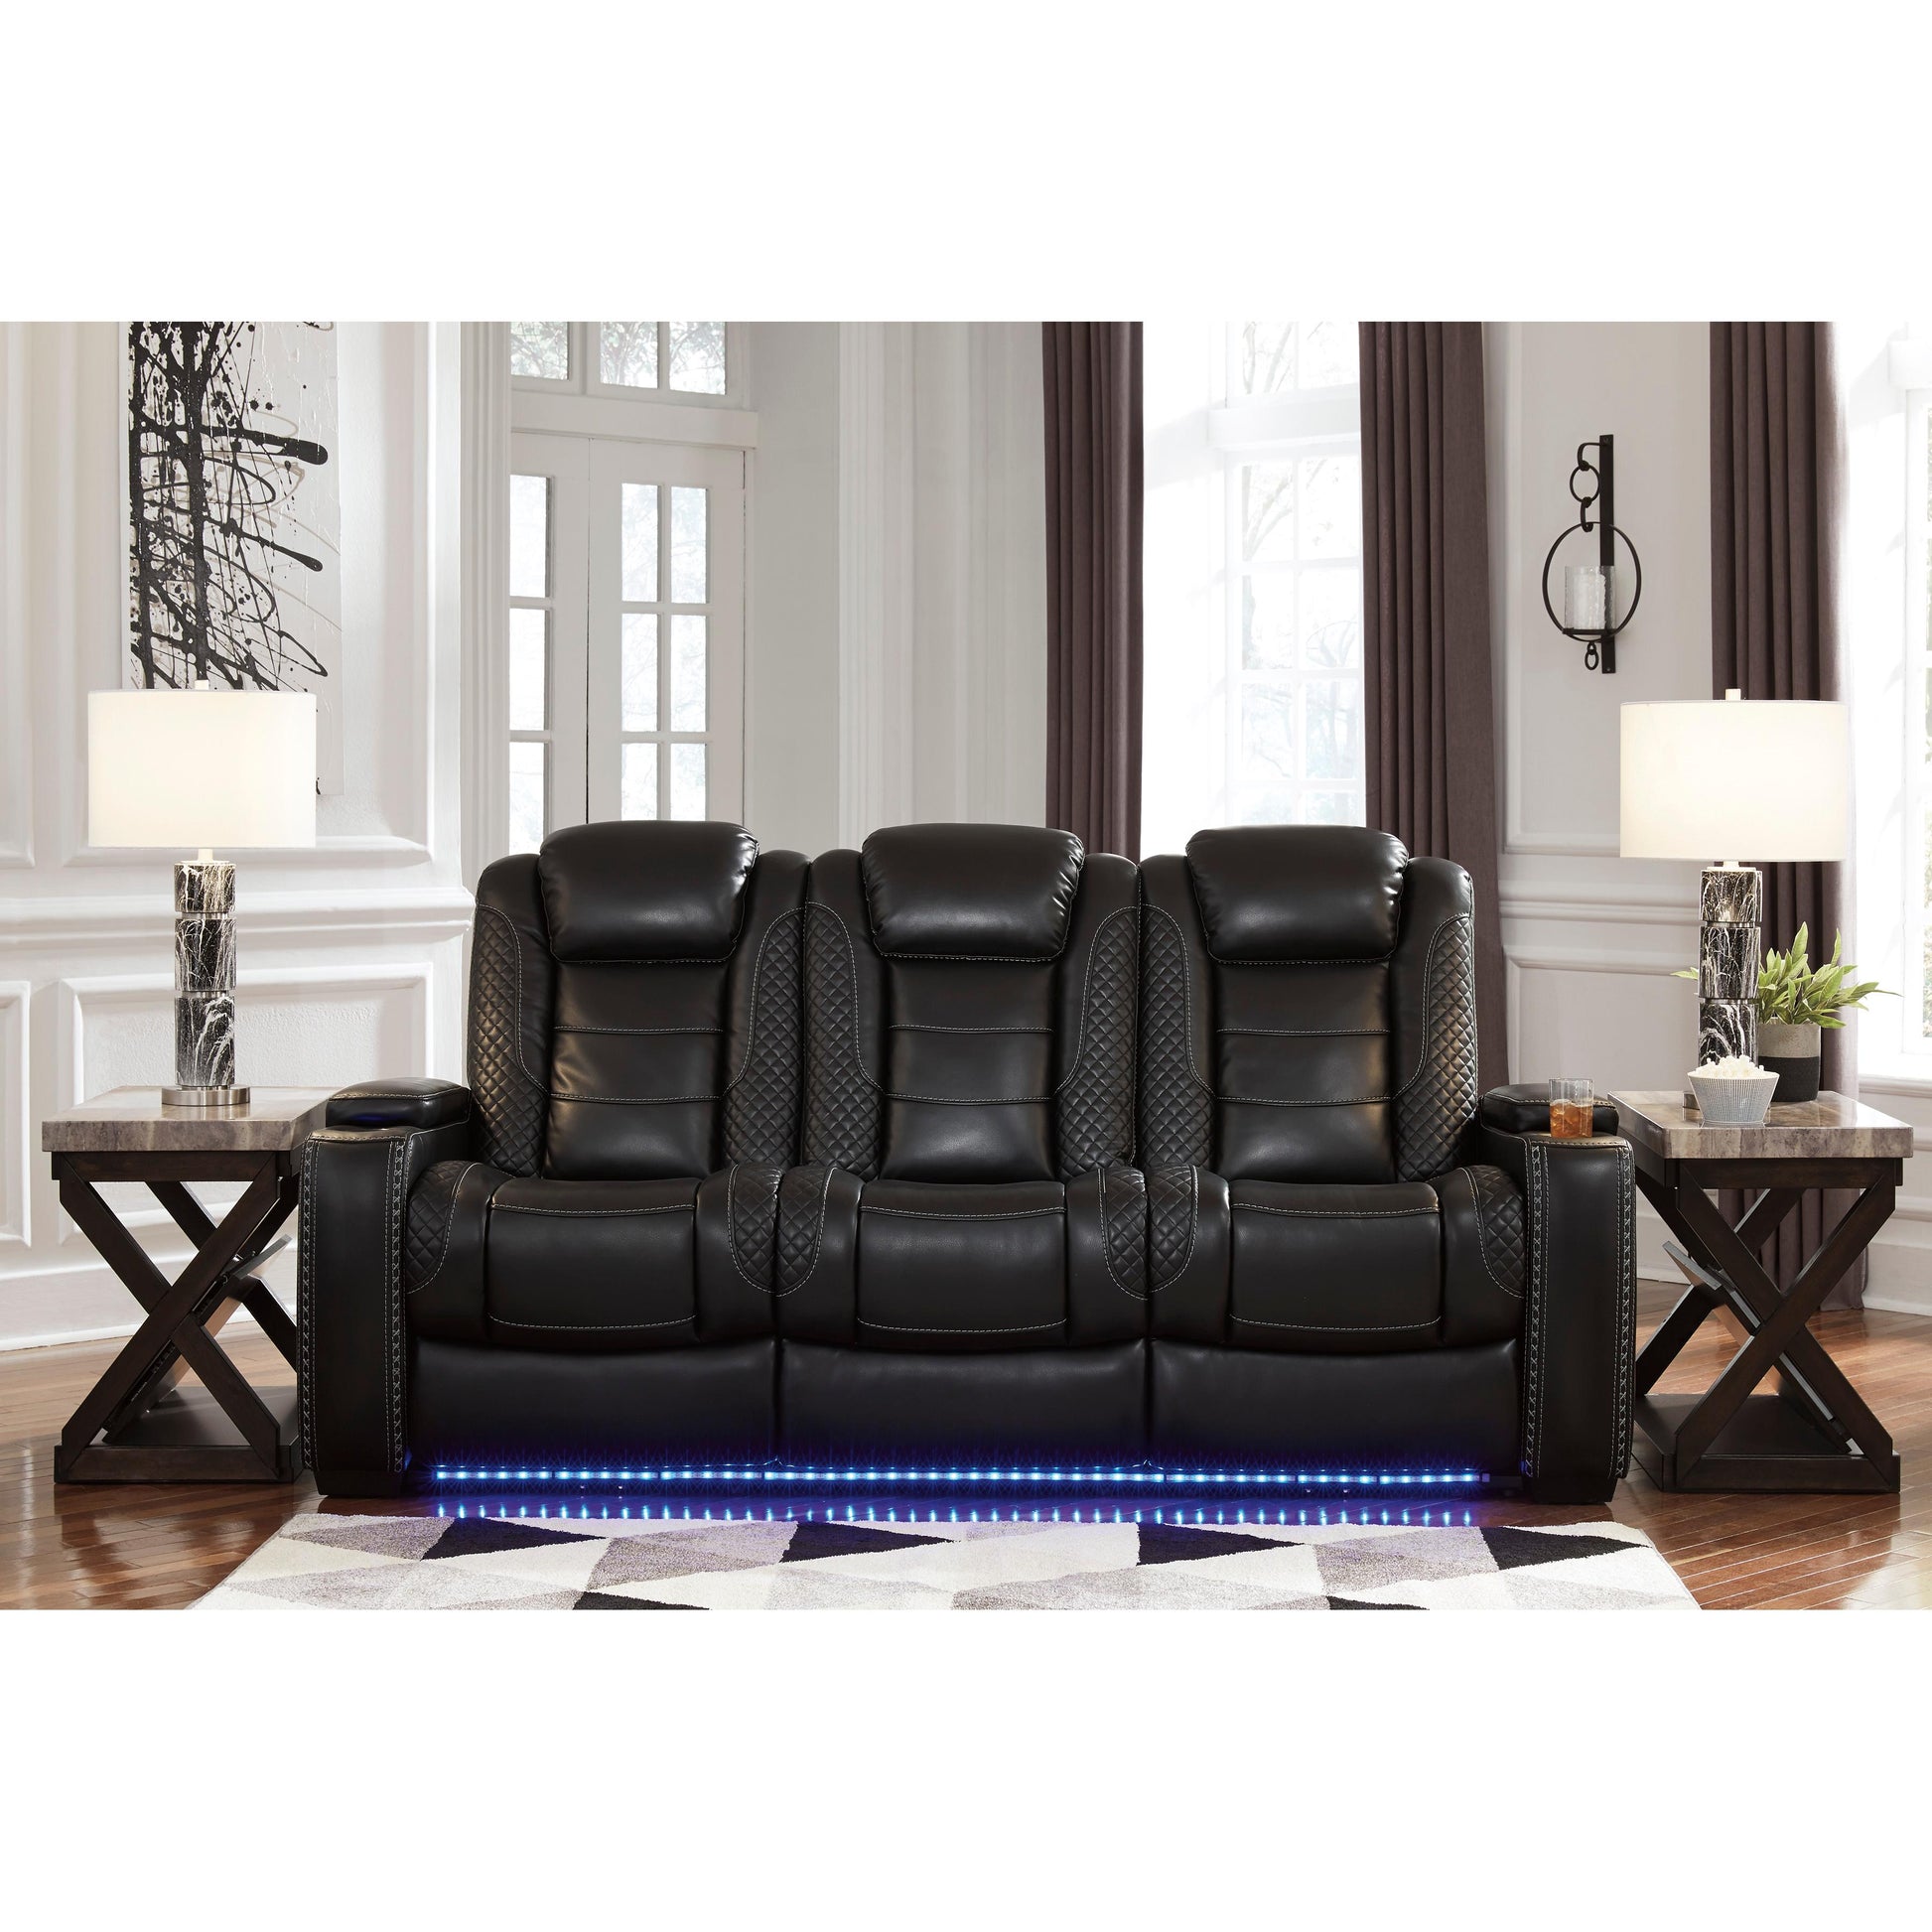 Signature Design by Ashley Party Time Power Reclining Leather Look Sofa 3700315